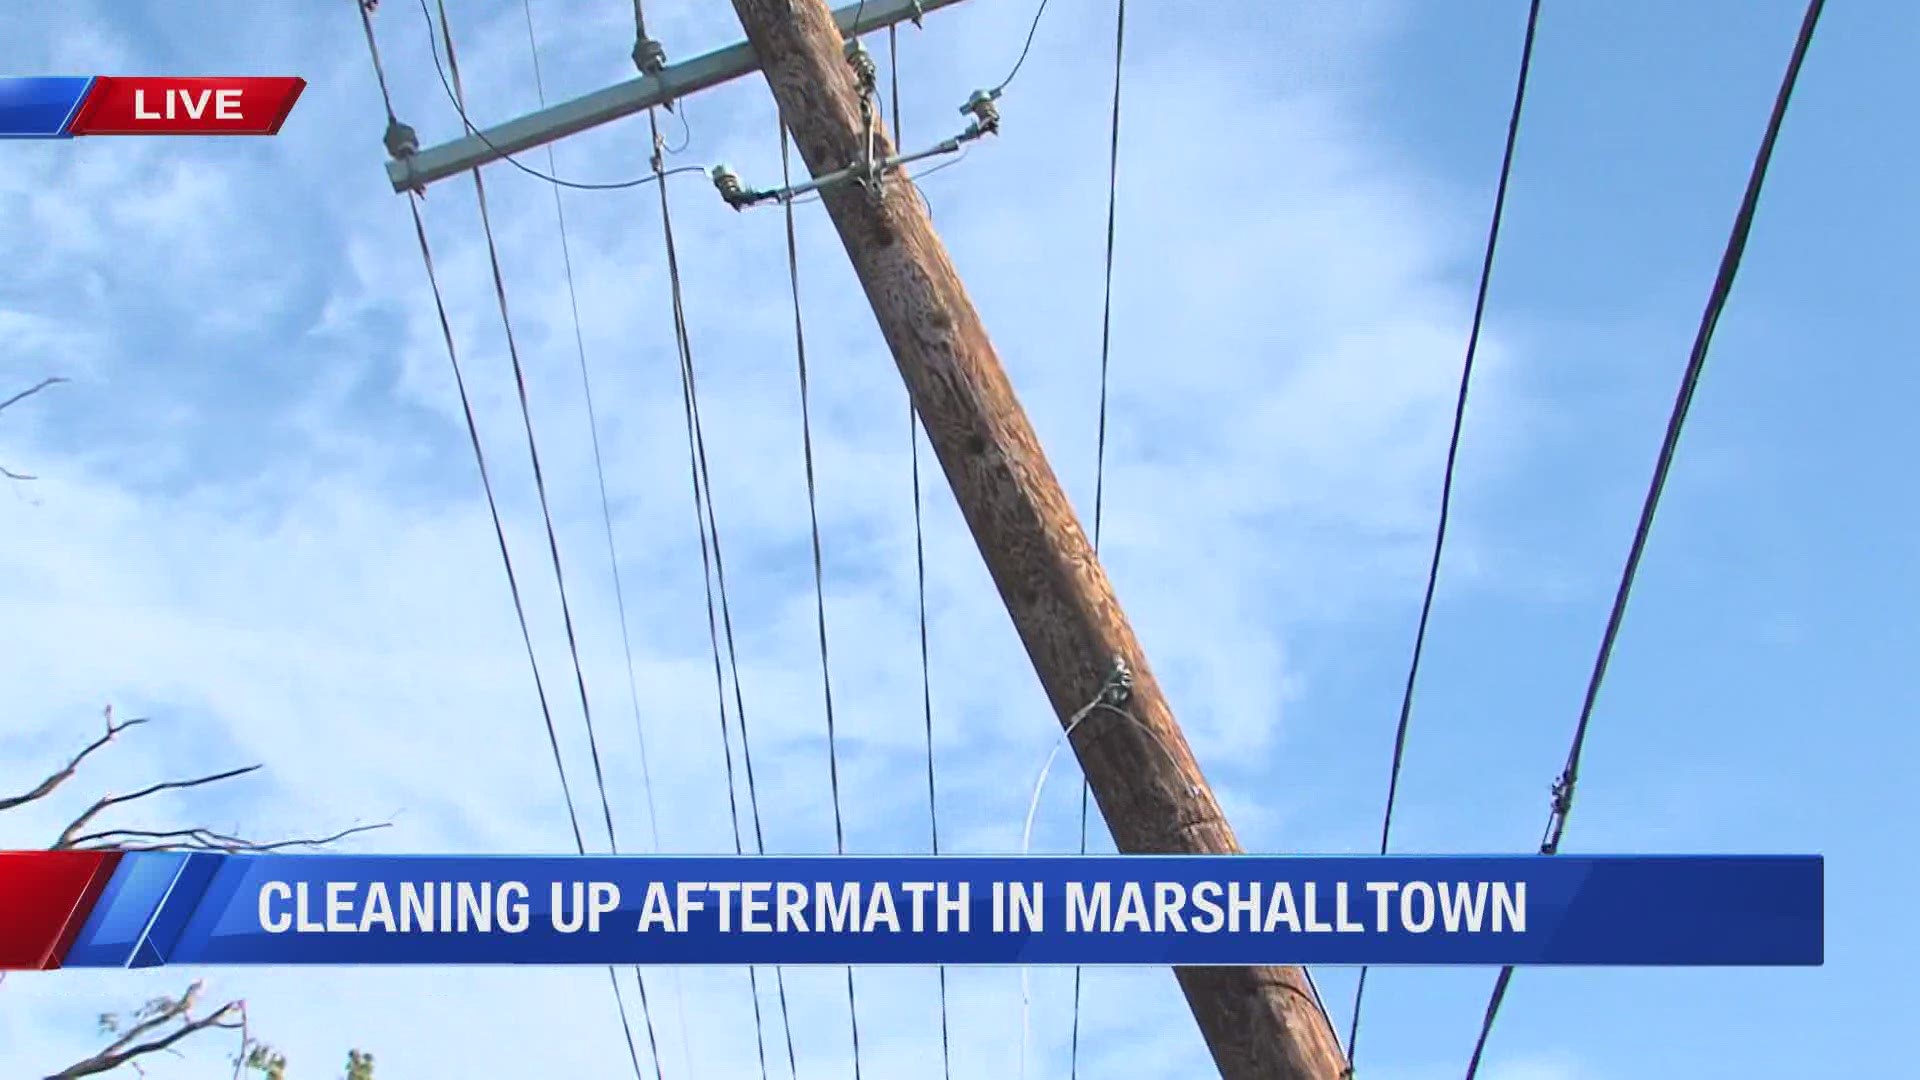 Marshalltown residents are picking up the pieces after another storm tears the town apart. An EF3 tornado ripped through in 2018, 2020 brought straight-line winds.